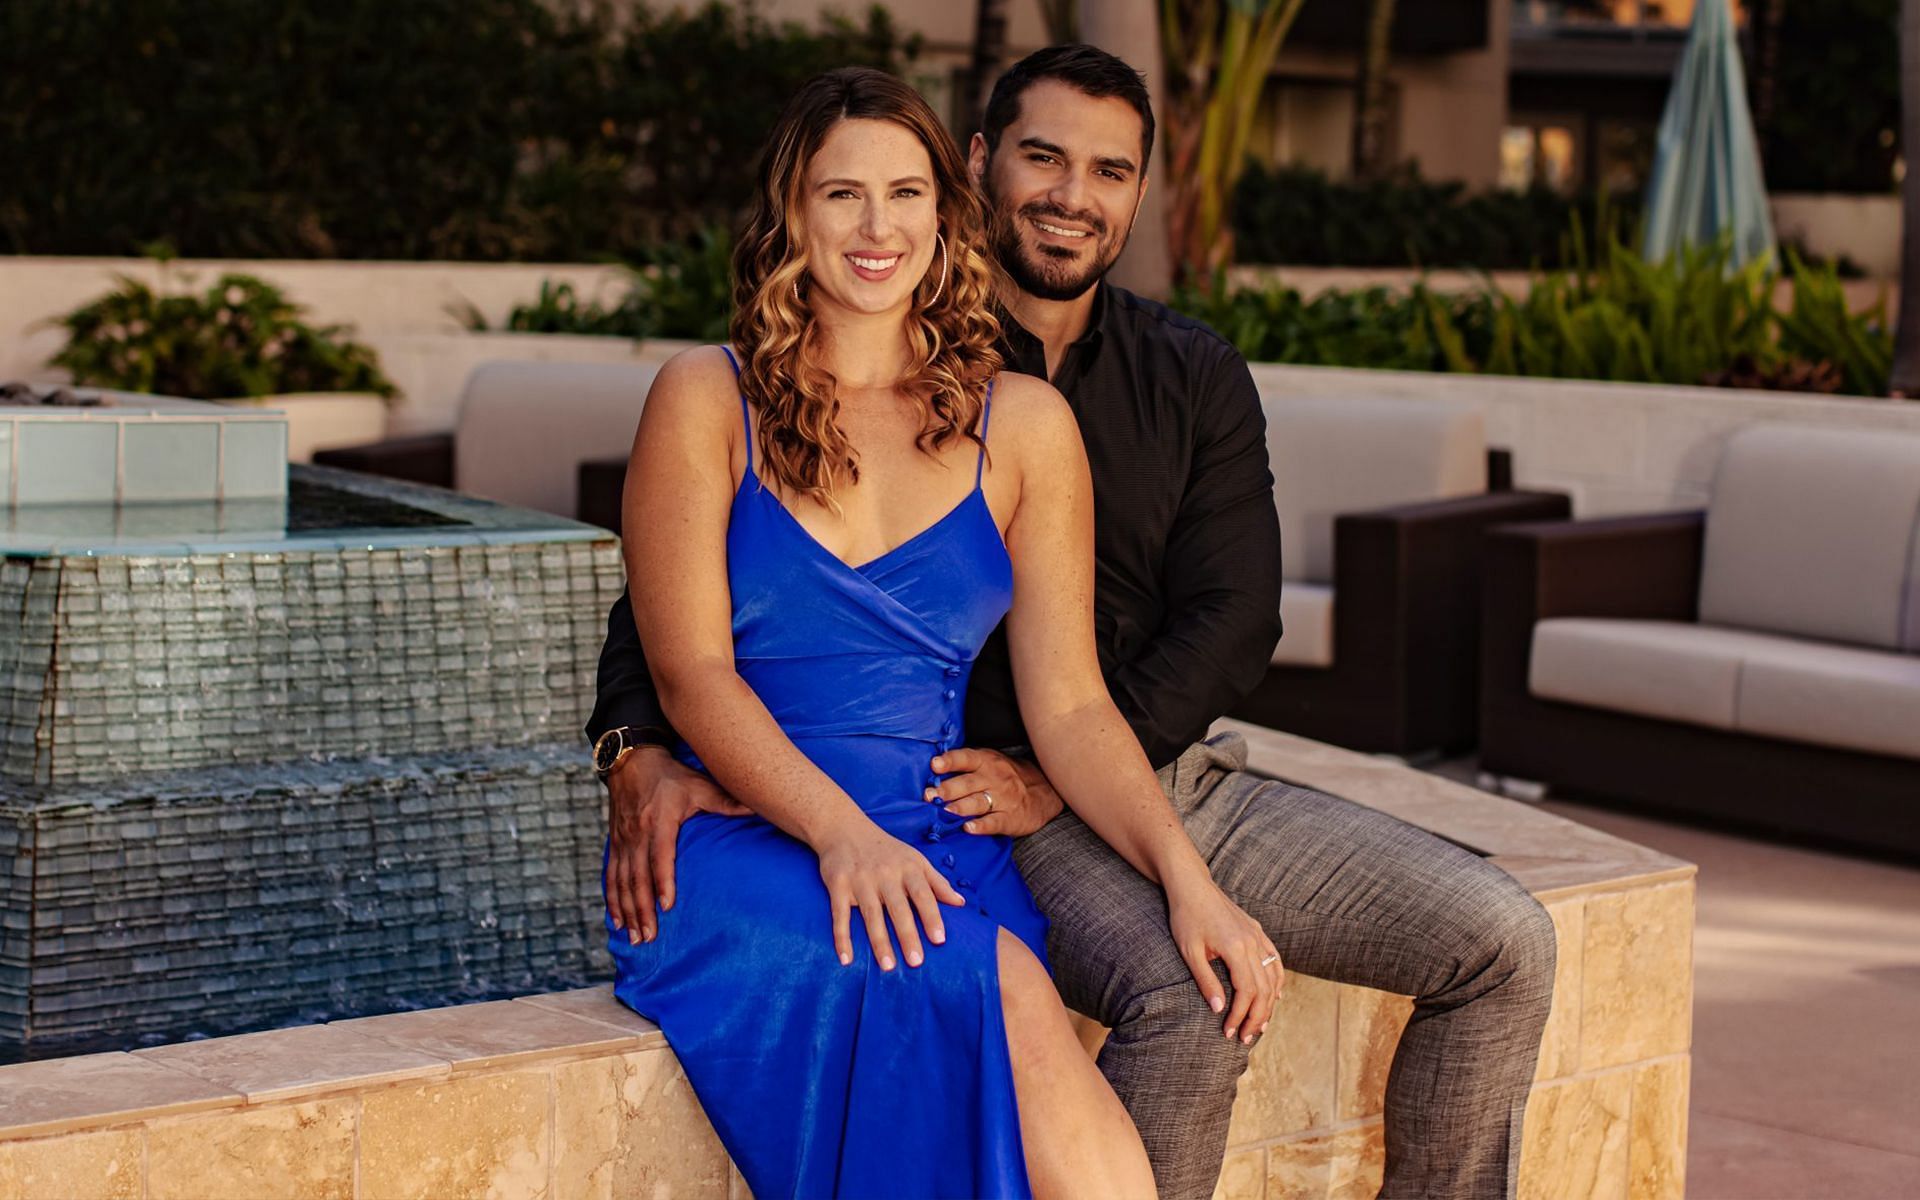 Lindy and Miguel will be starring in Married at First Sight, airing from July 6 (Image via Lifetime)